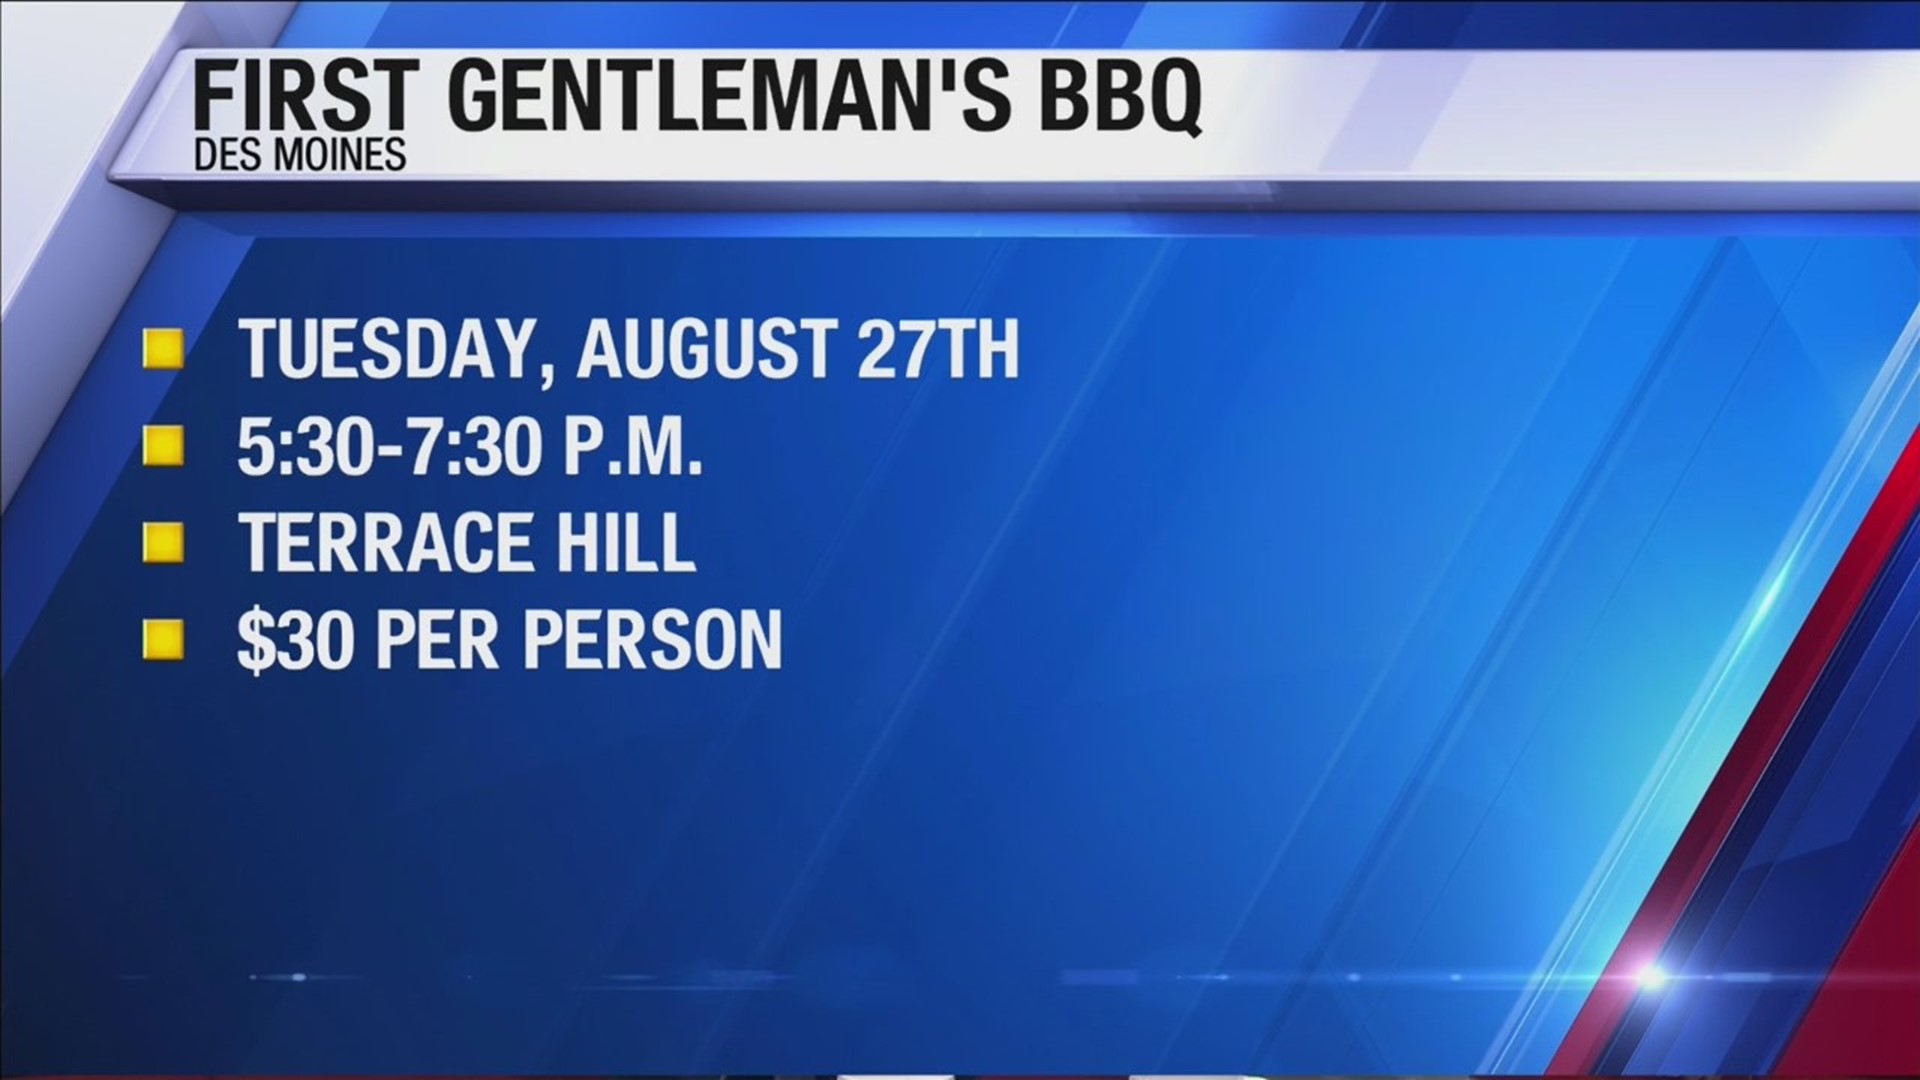 Check out Terrace Hill while at the First Gentleman's BBQ